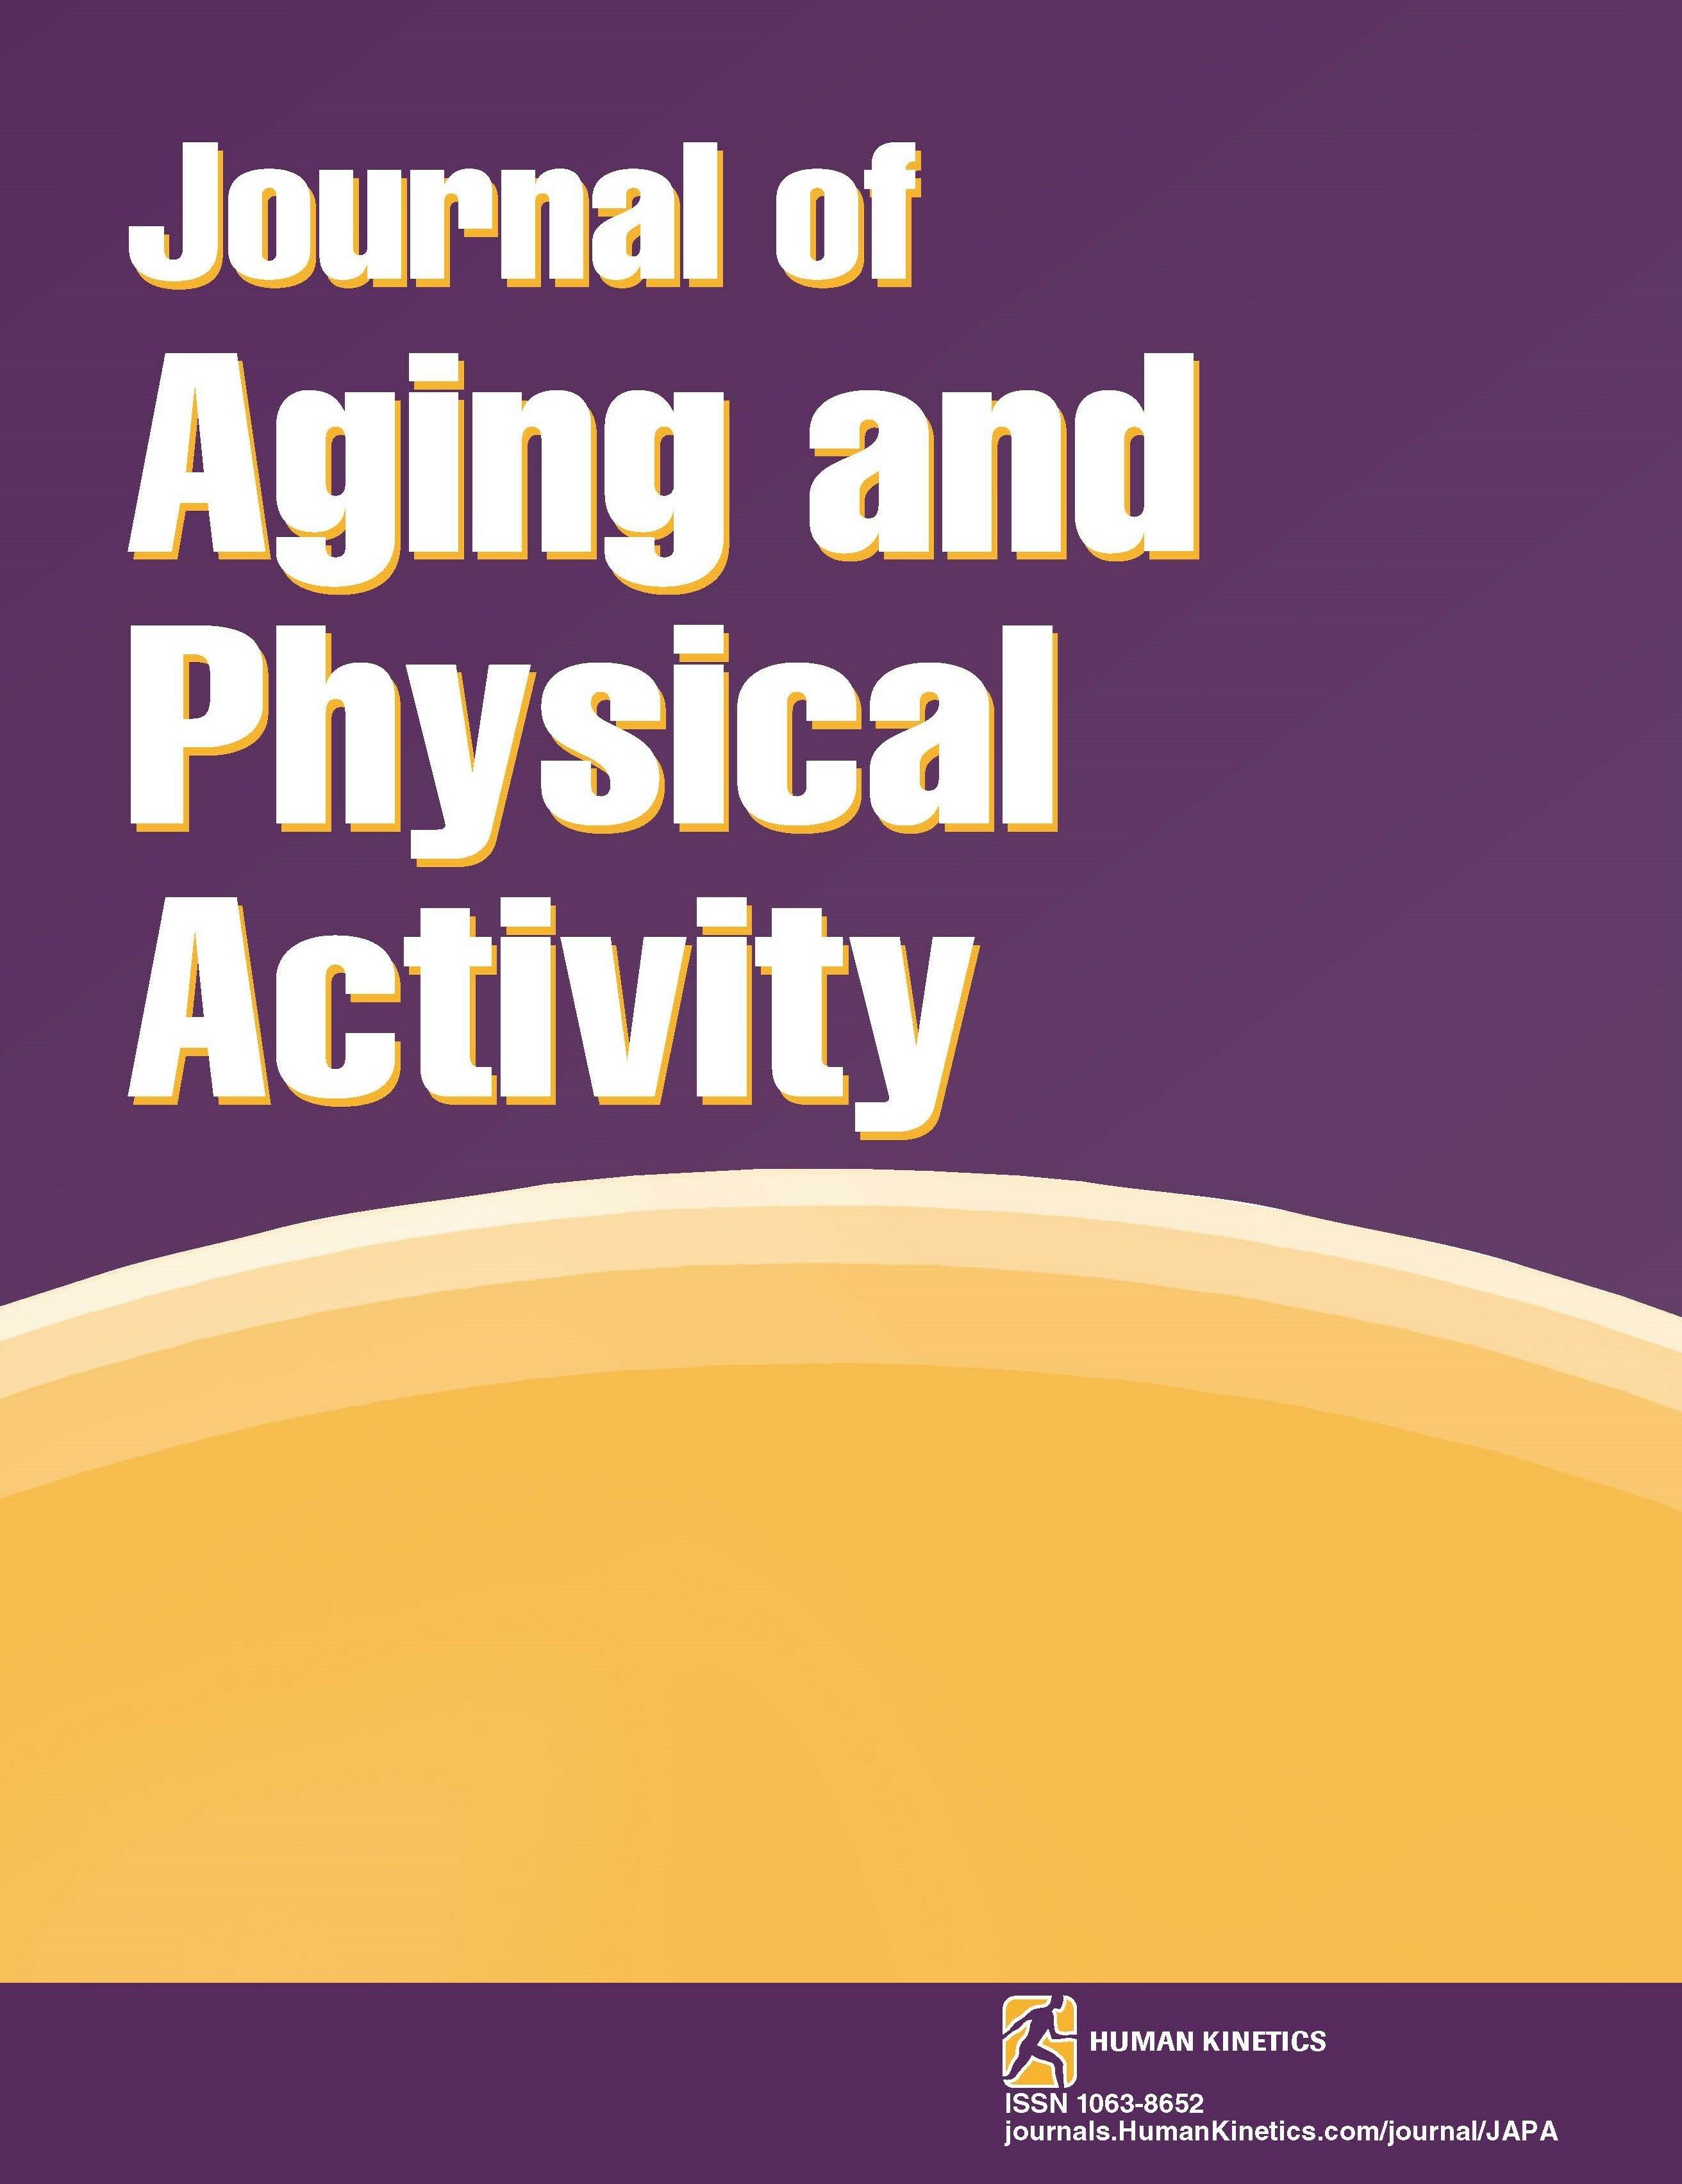 Reflections on 30 Years of Service to the Journal of Aging and Physical Activity Editorial Board